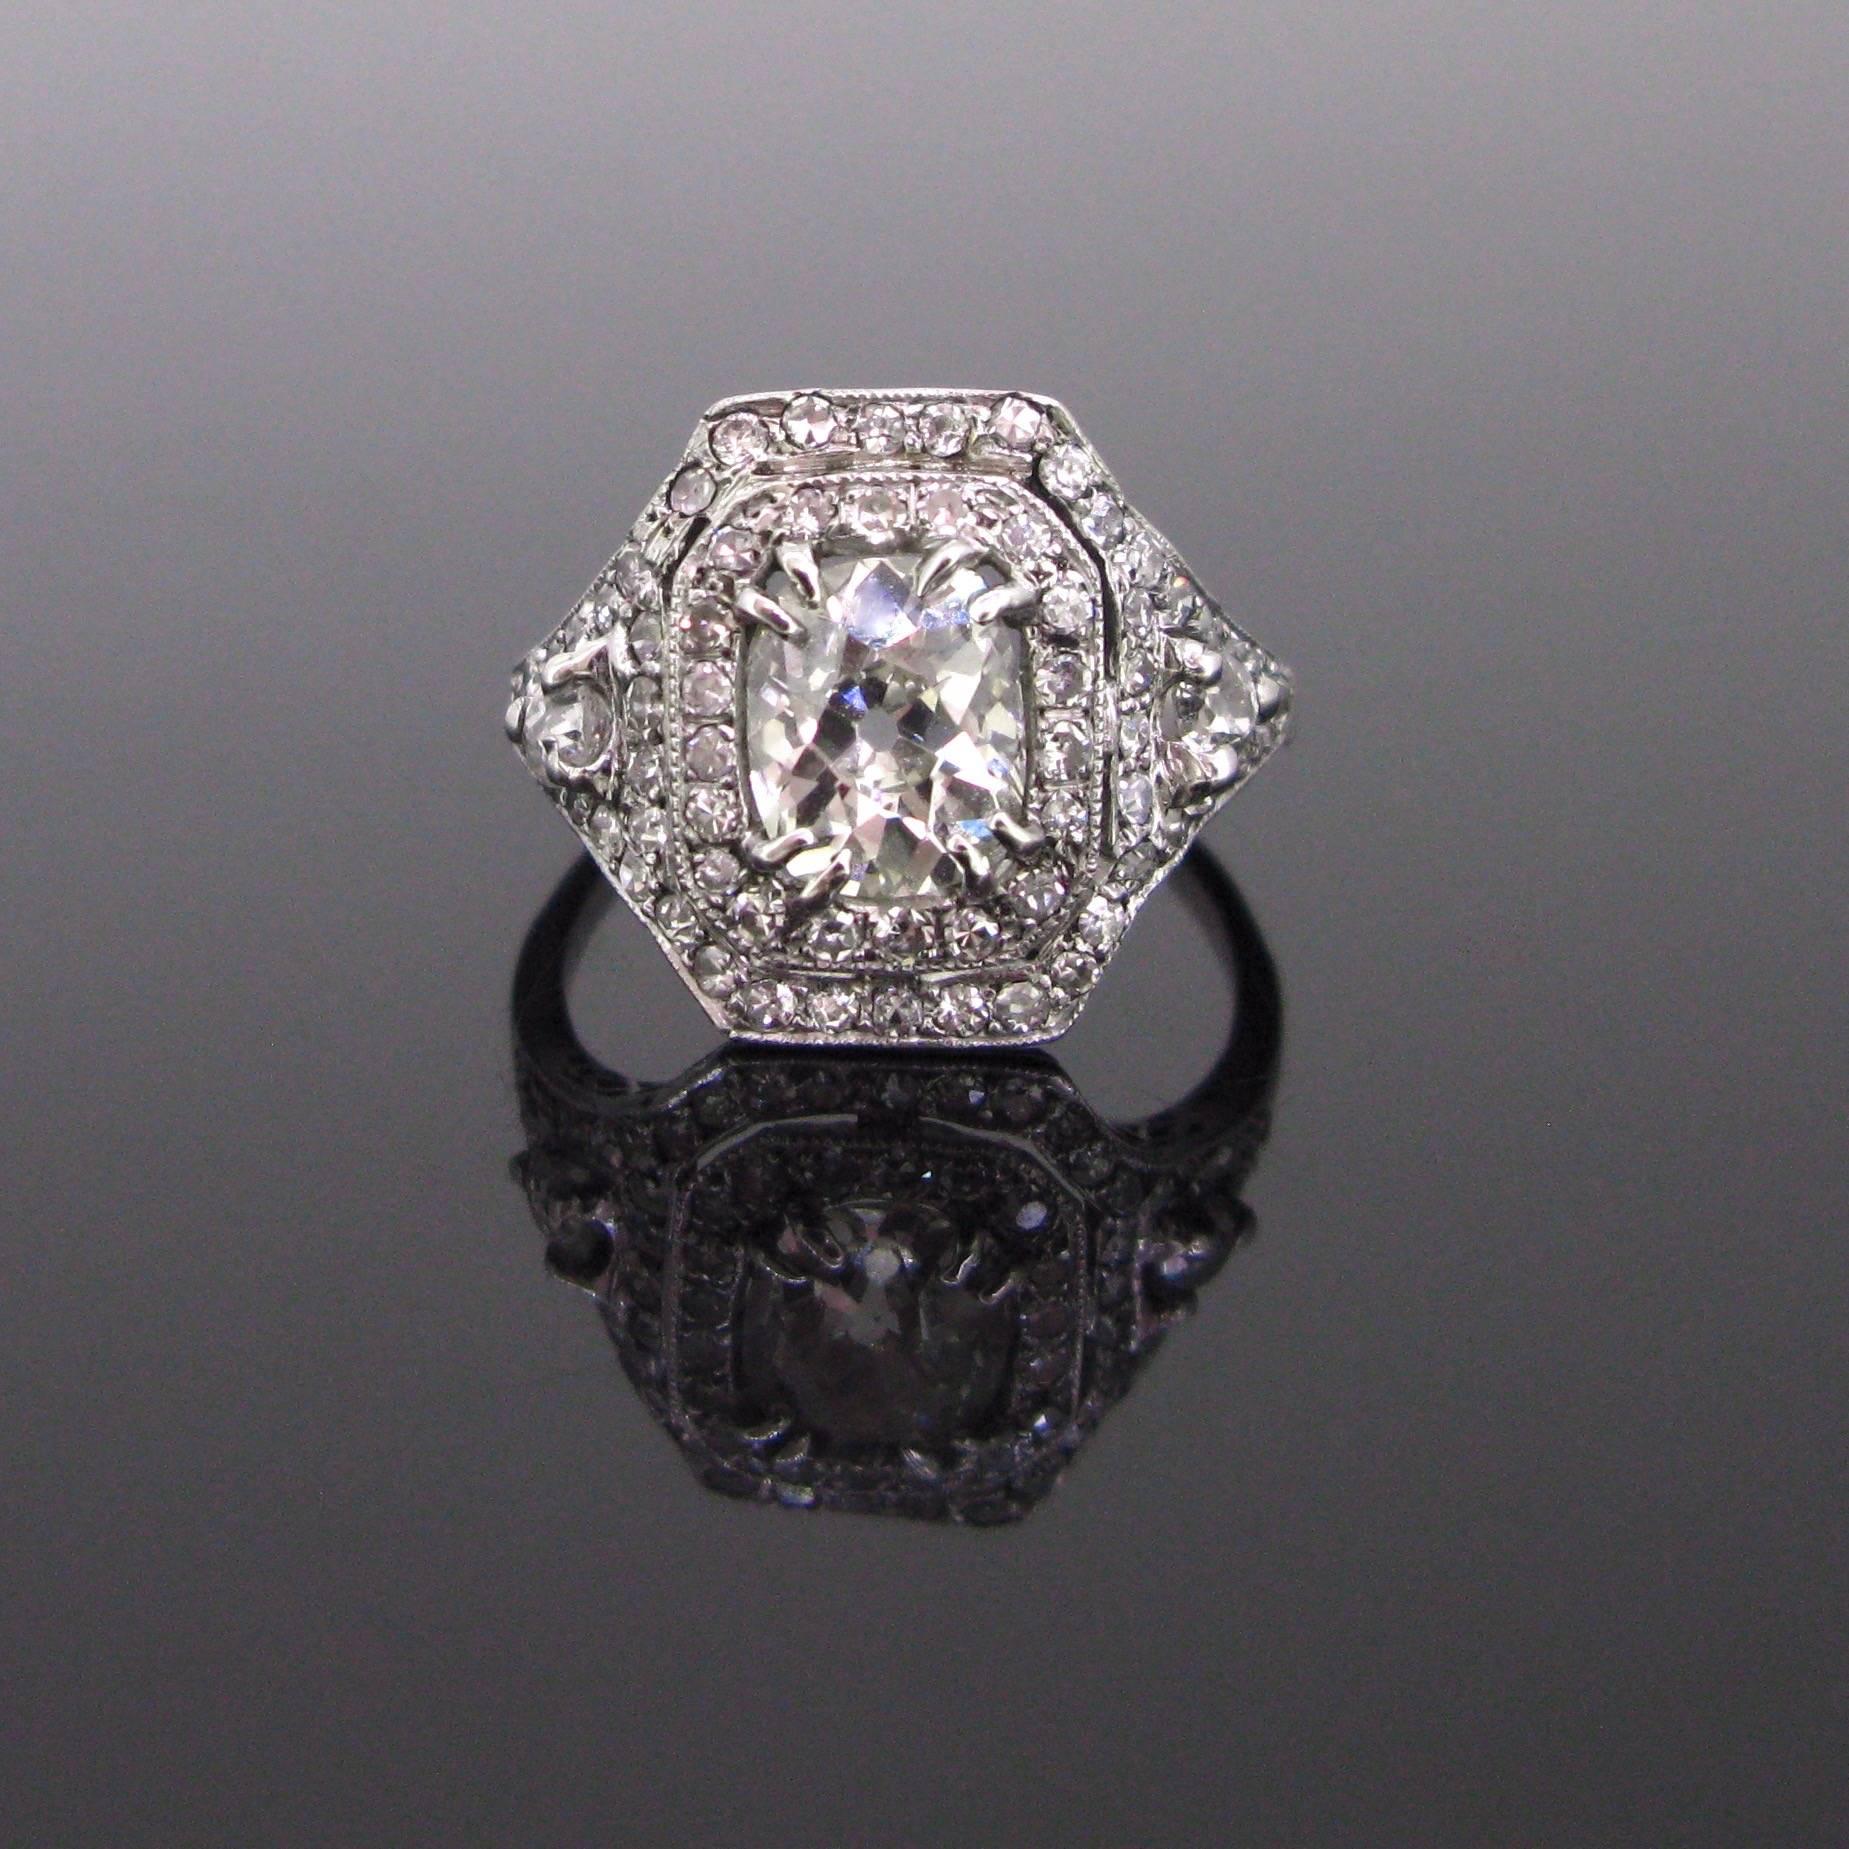 This beautiful ring is set with a vibrant rectangular cushion cut diamond. It is surrounded with 8/8 cut diamonds. The shoulders are adorned with diamonds, with a millegrain setting. It was fully handcrafted into platinum and hallmarked with the